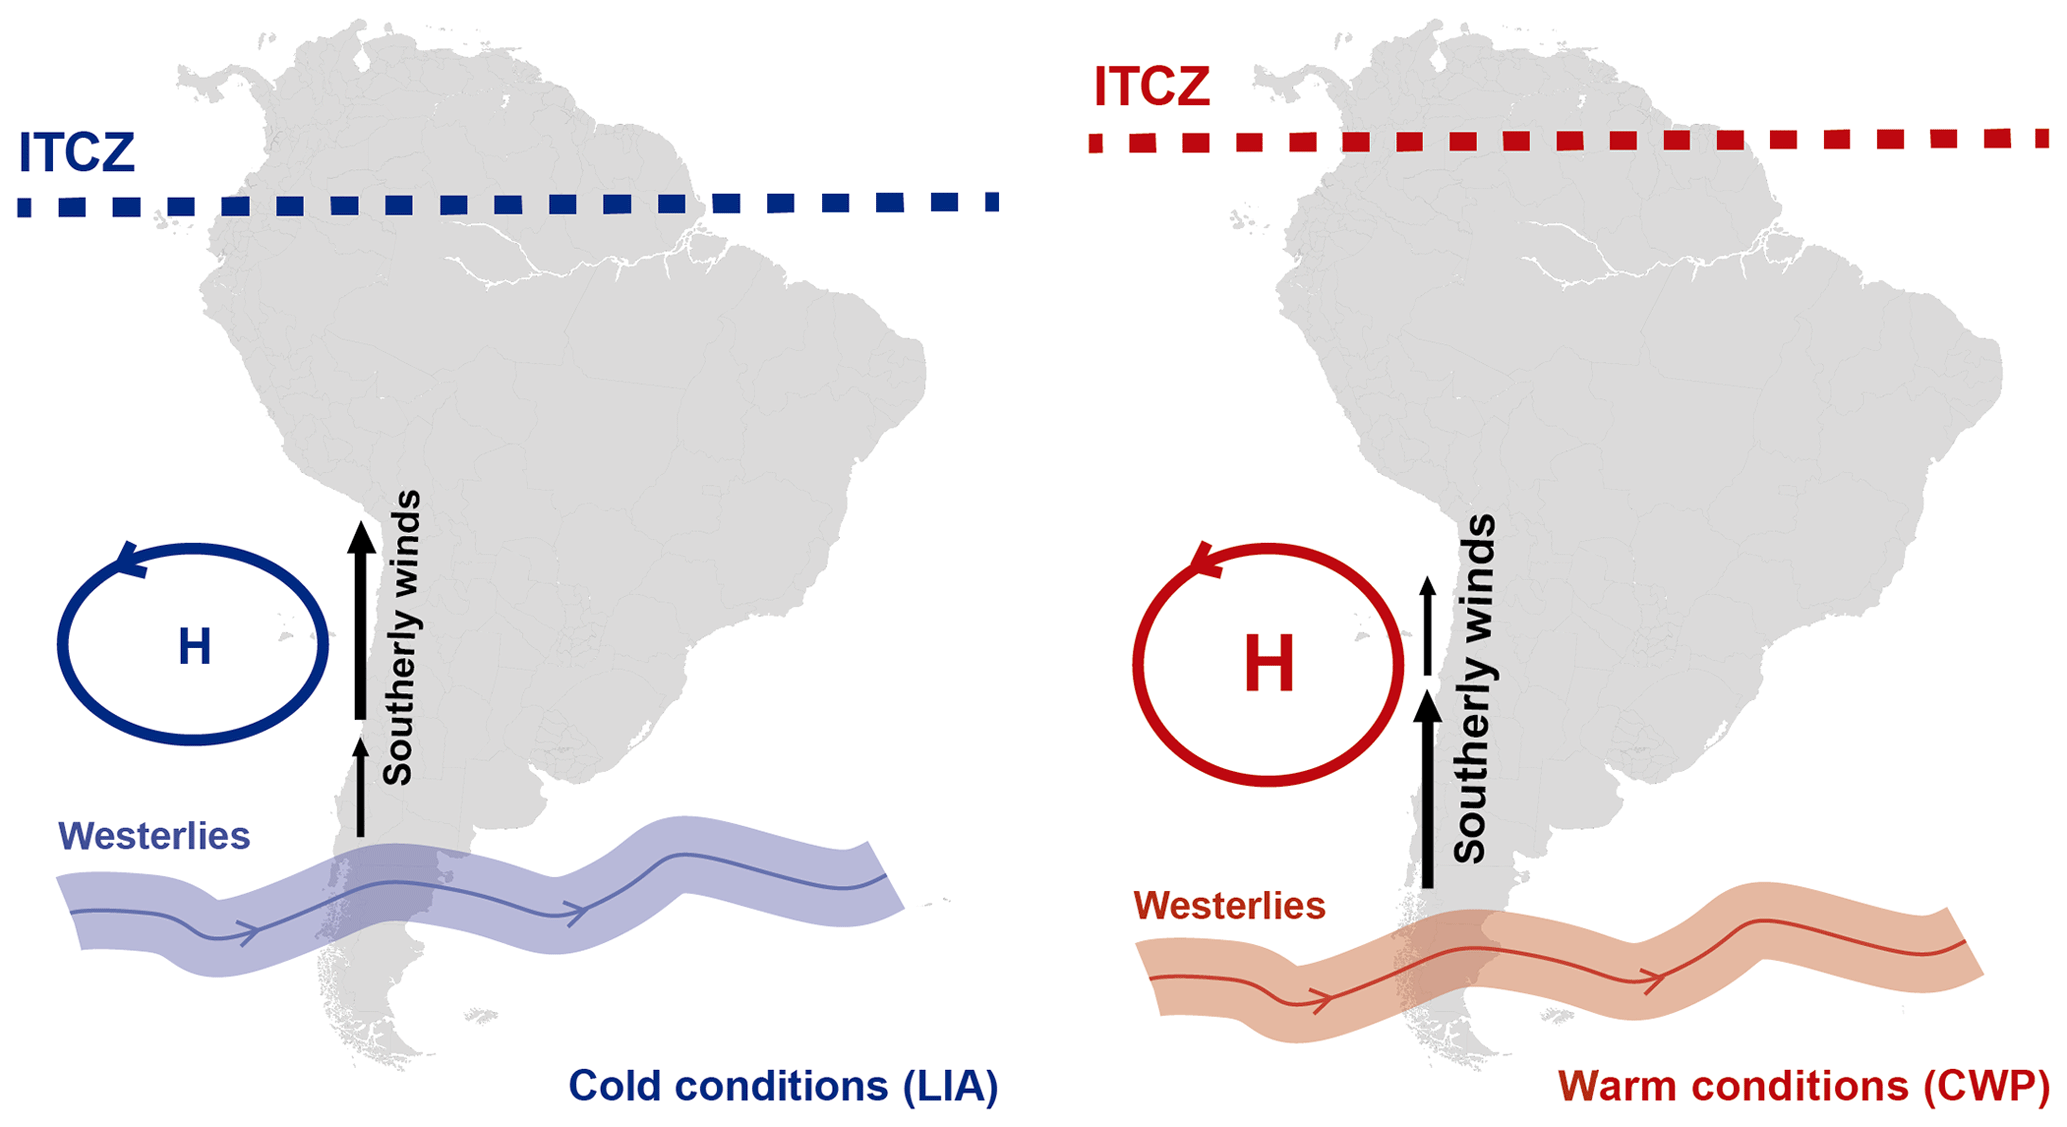 16. Reconstruction of the SST gradients in the Pacific Eastern Boundary